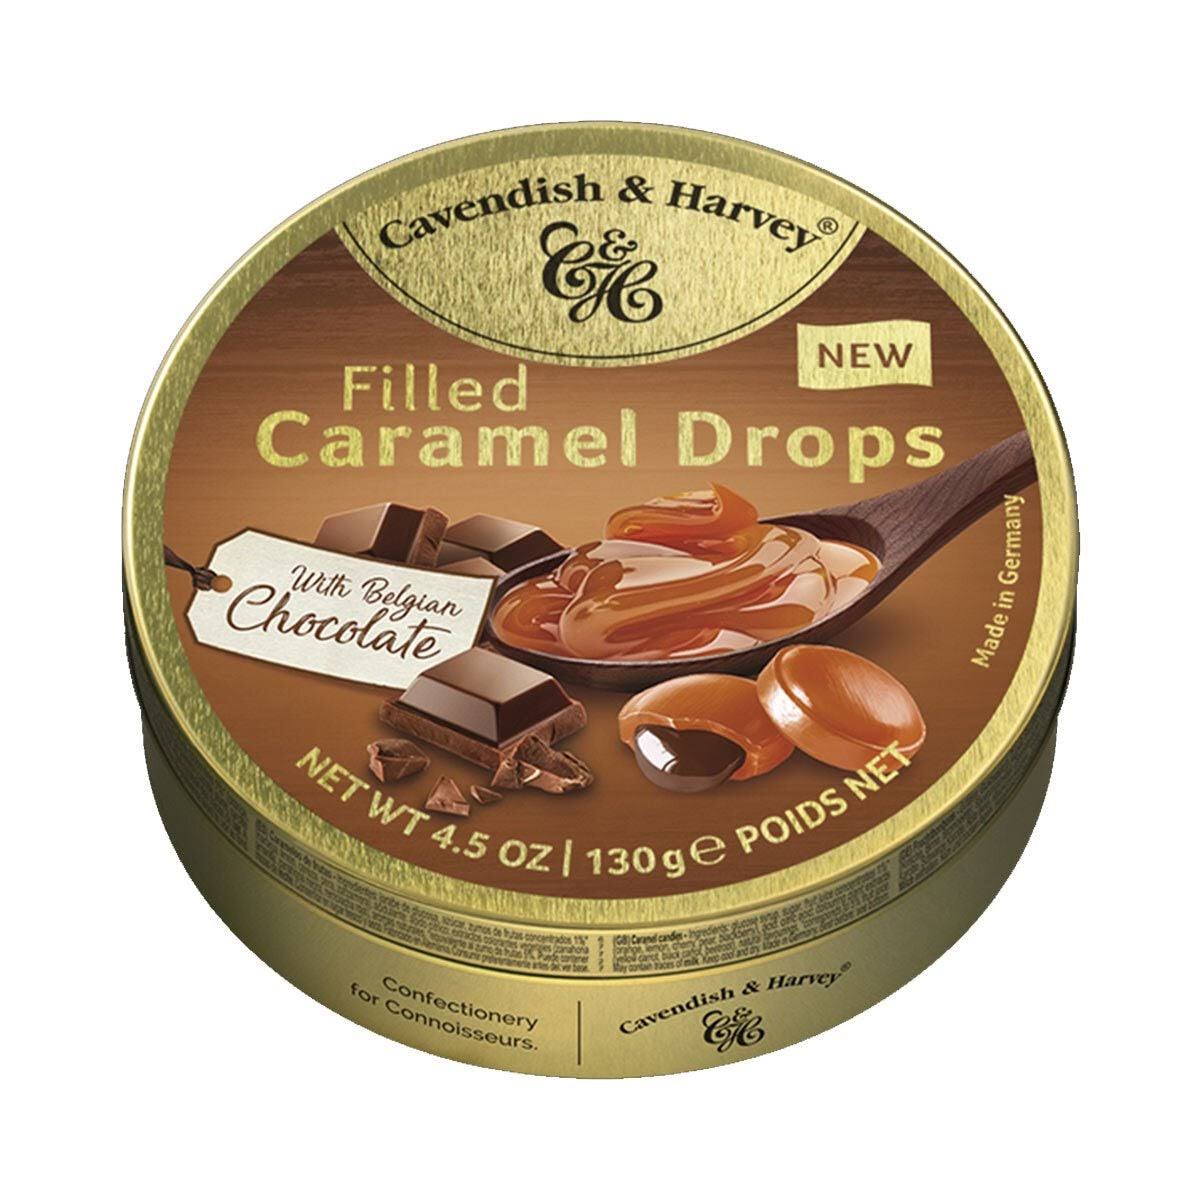 Cavendish and Harvey Caramel Drops Filled with Chocolate 130g